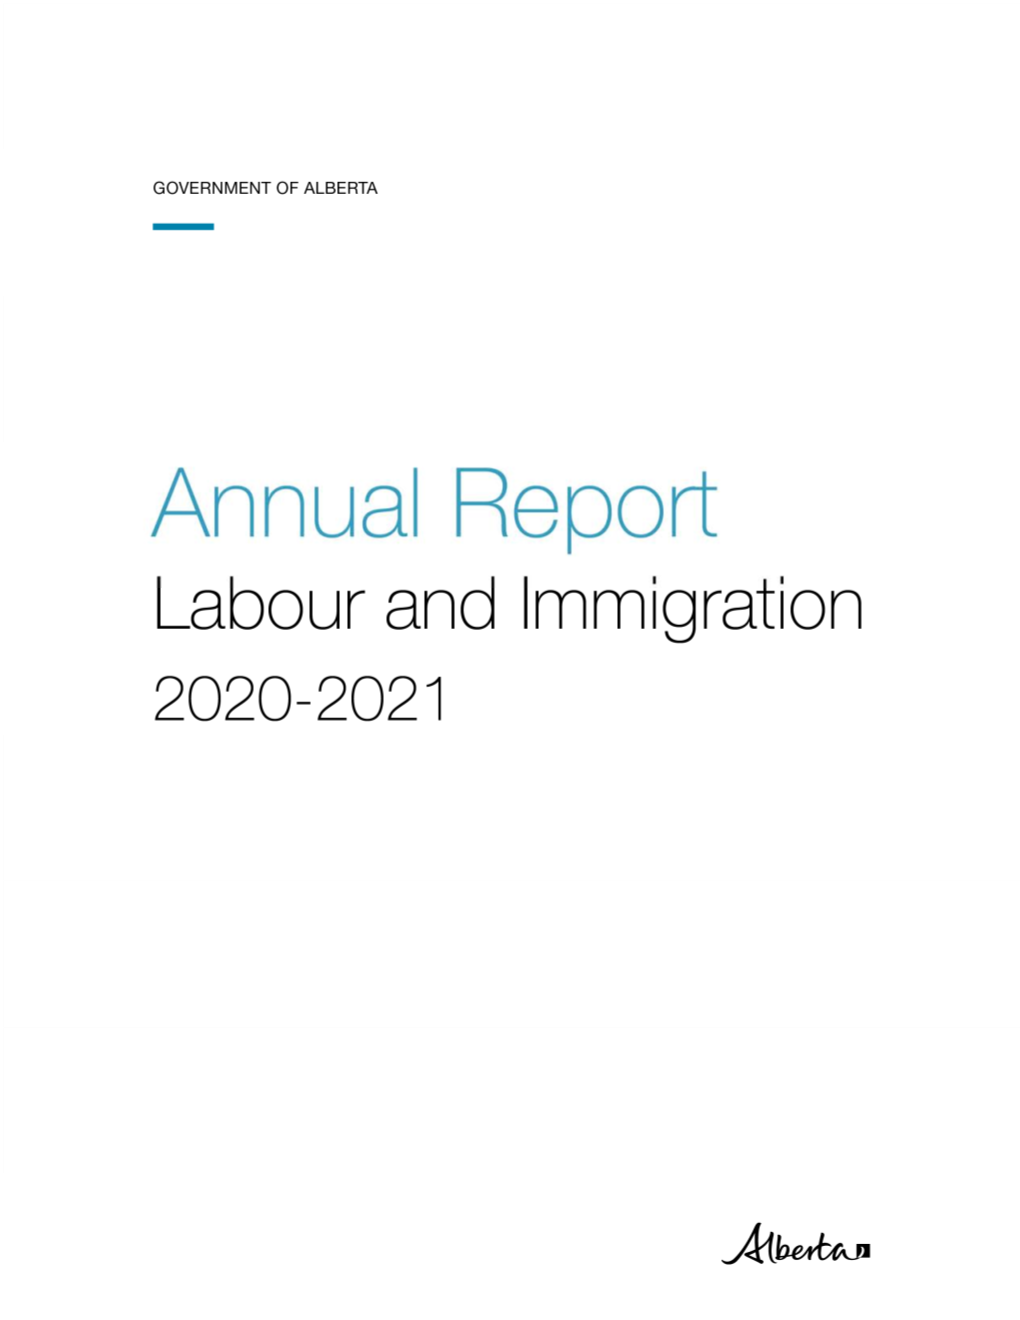 2020-2021 Labour and Immigration Annual Report